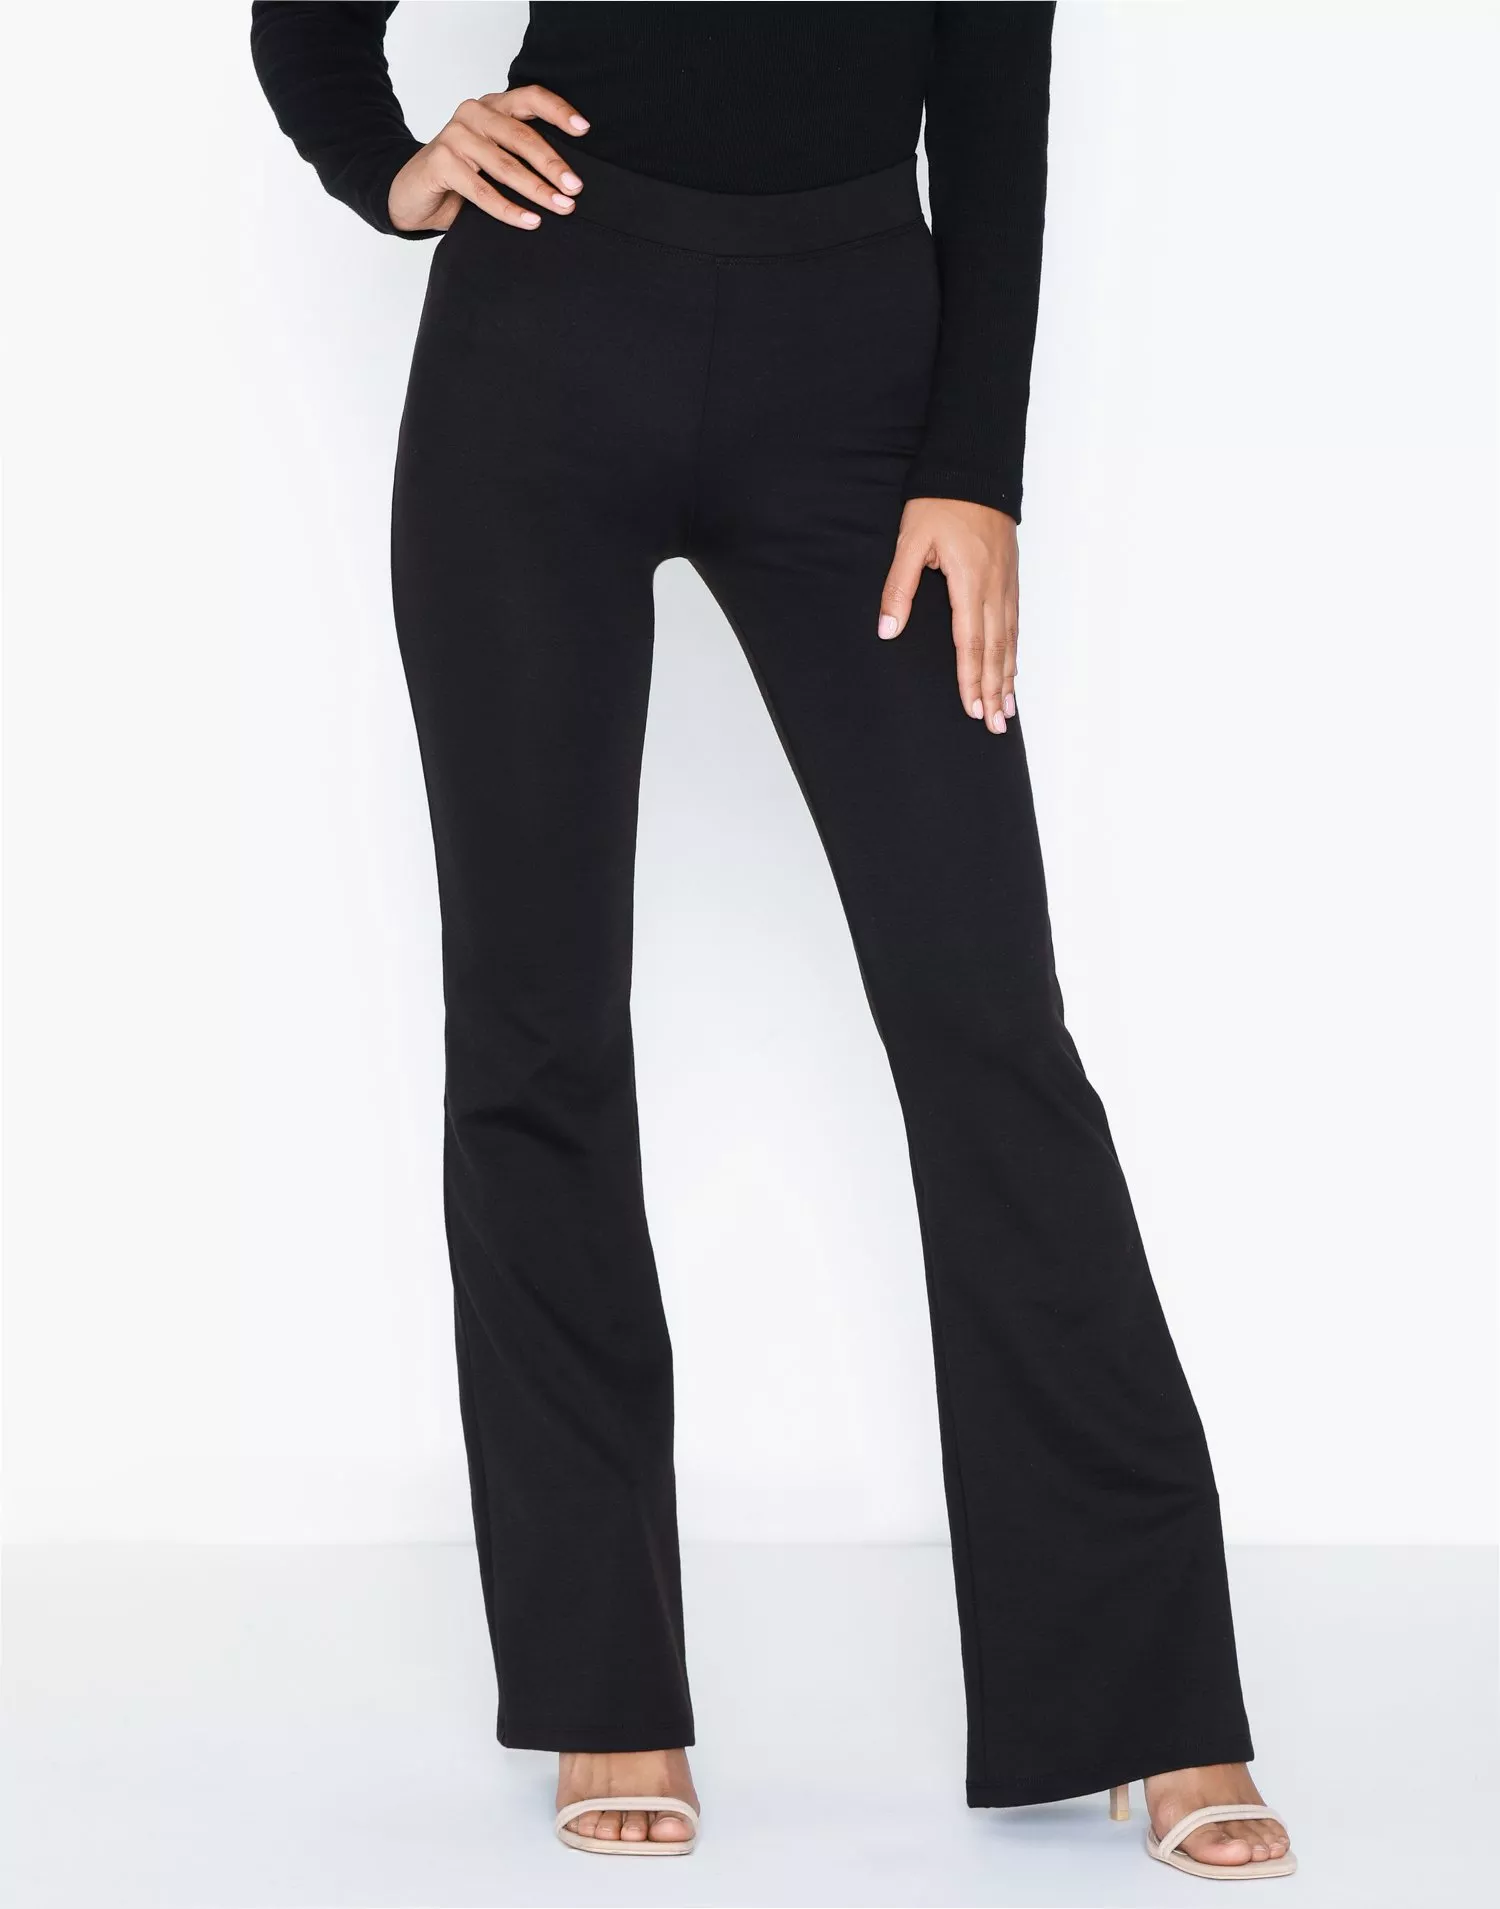 ONLFEVER Buy JRS - Black Only FLAIRED PANTS